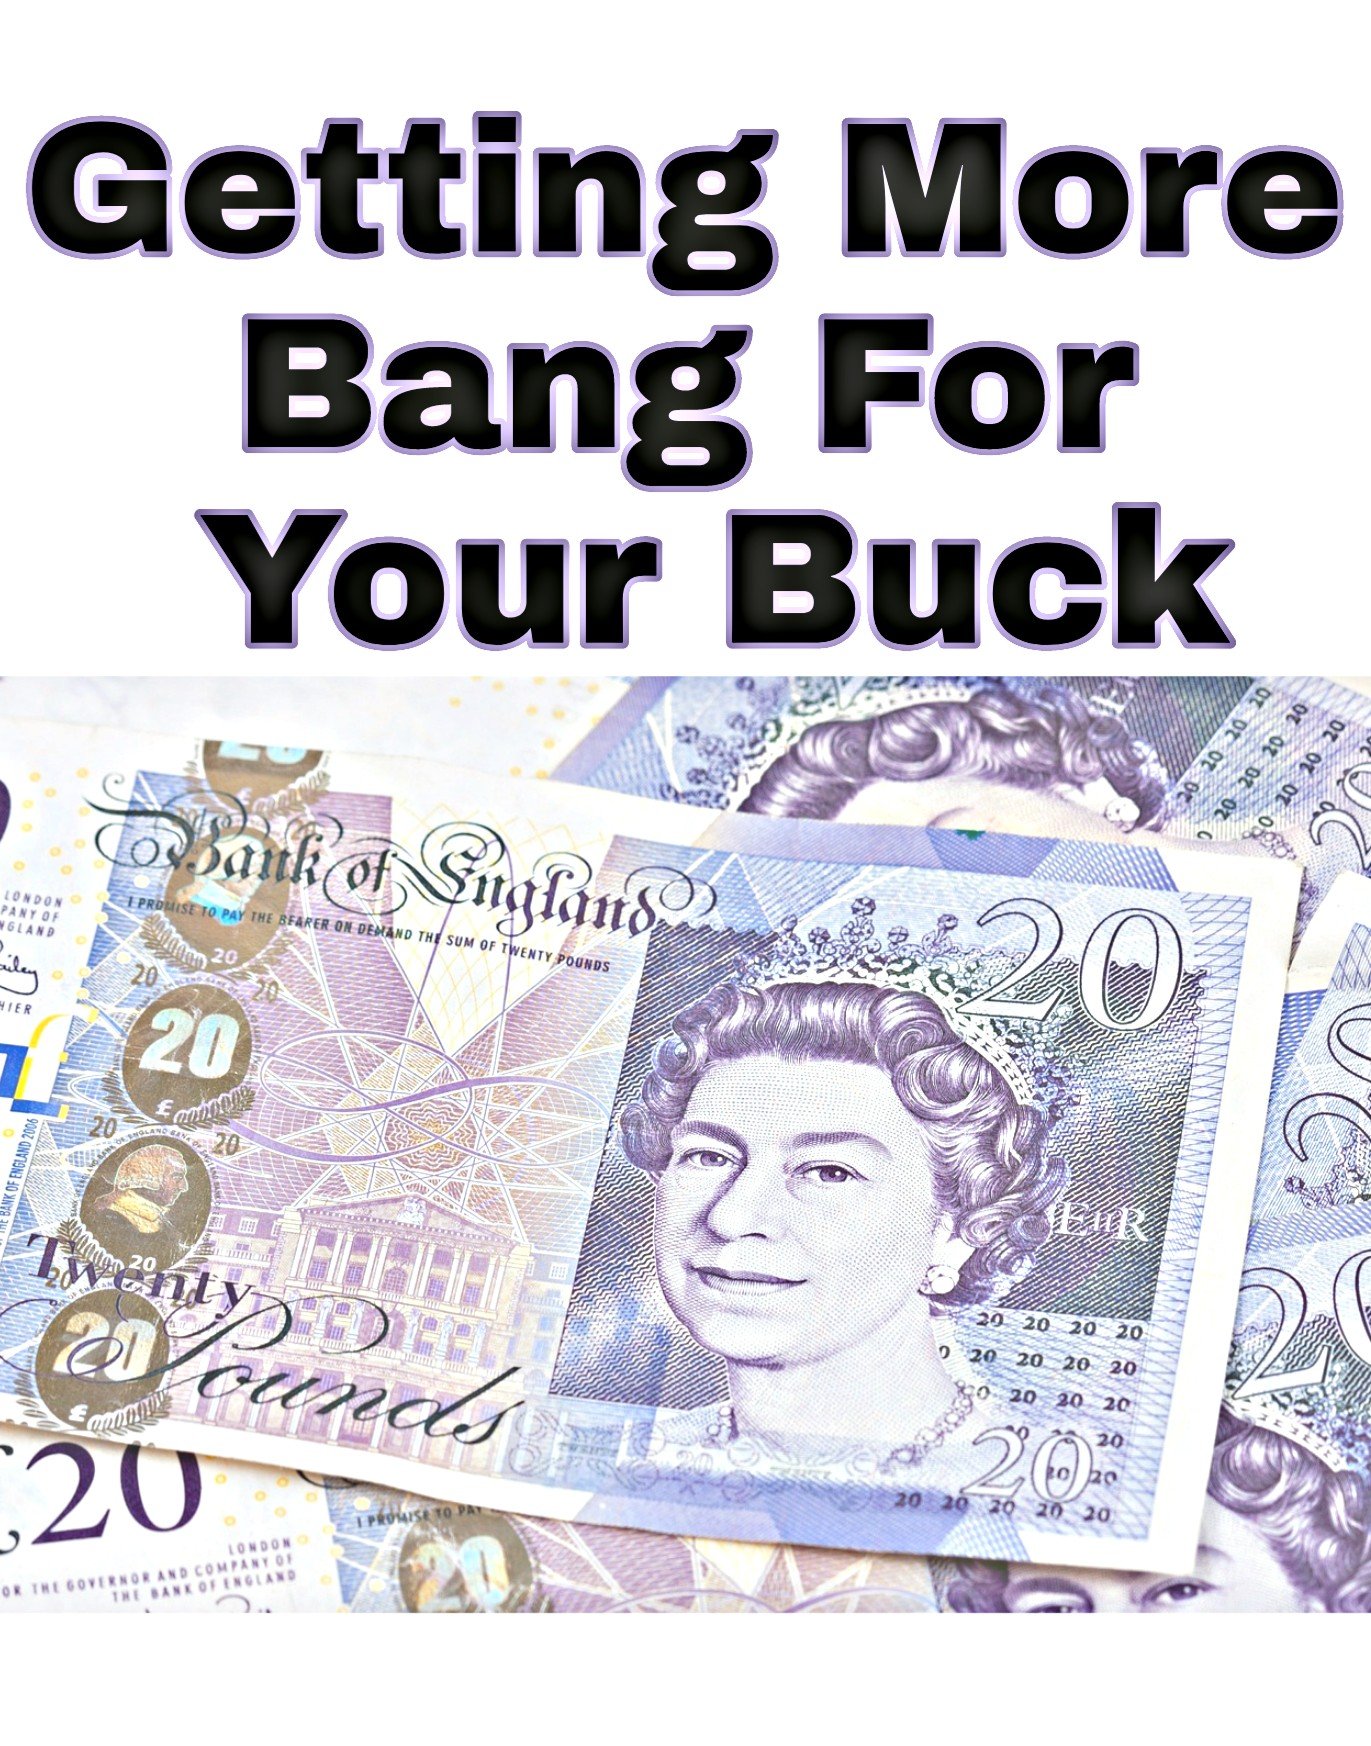 Getting More Bang For Your Buck title with image of 20 pound notes